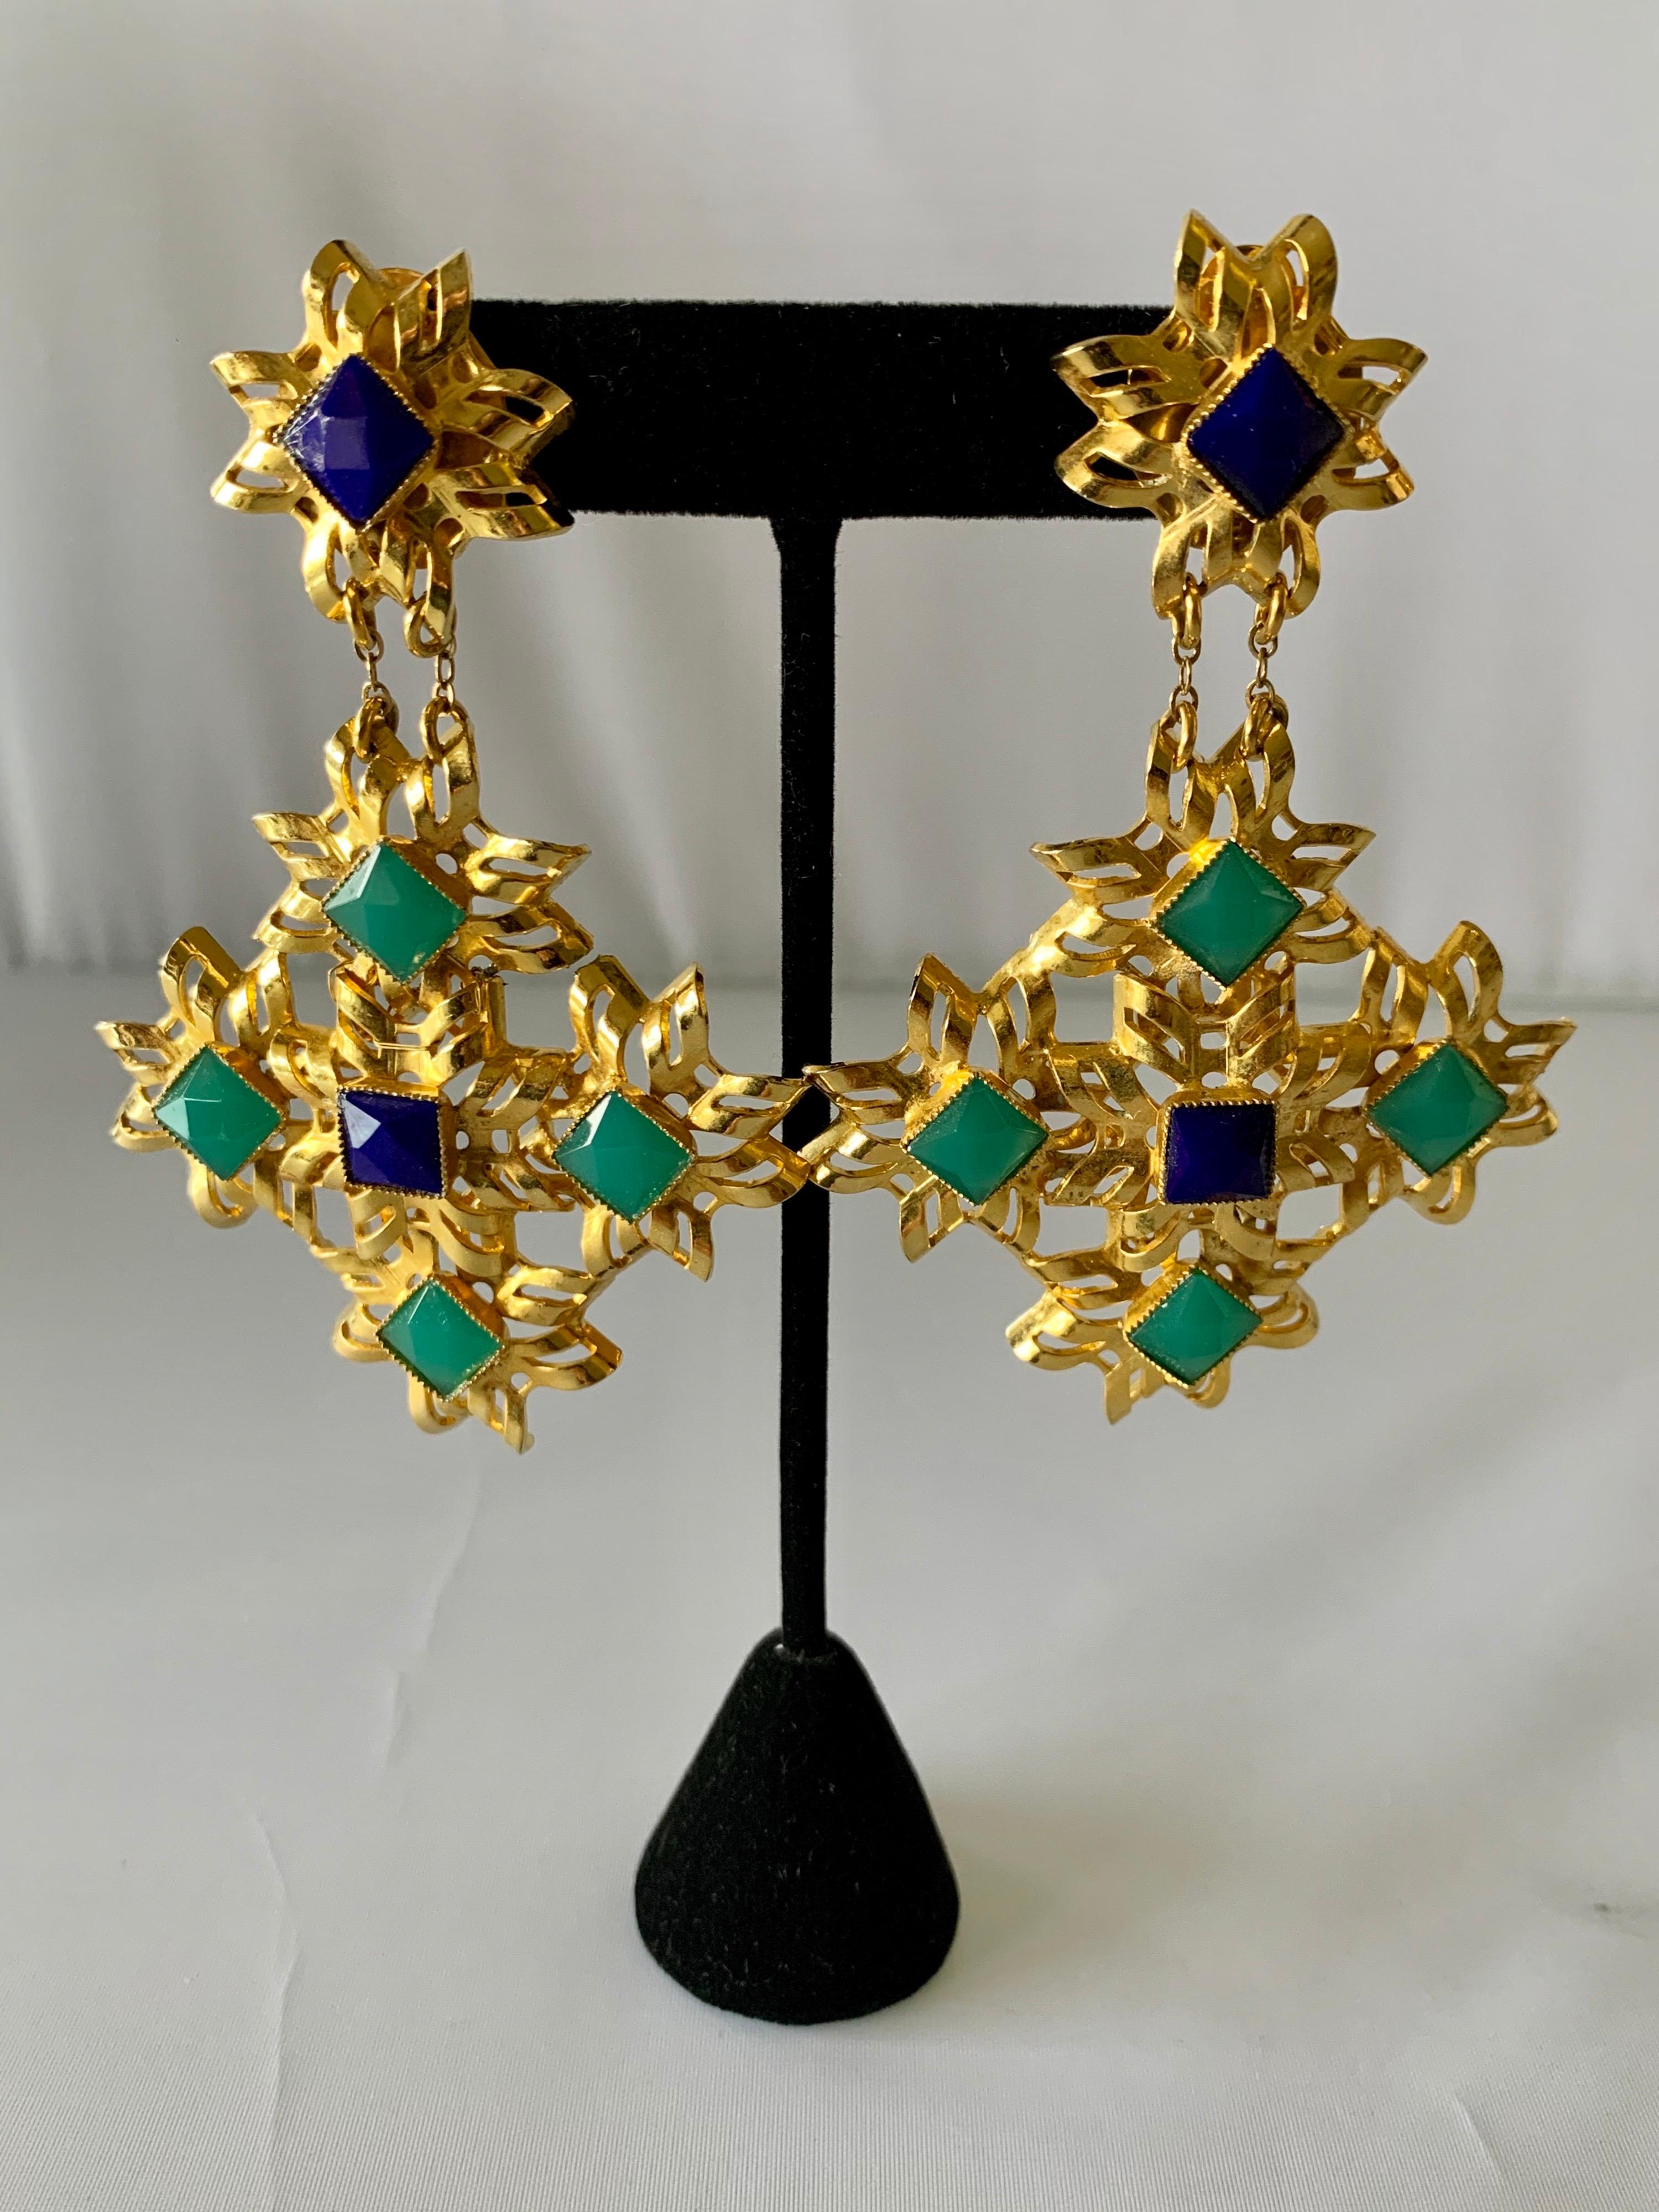 Large architectural statement clip-on earrings, comprised out of gilt metal in a contemporary open lattice motif adorned by faceted faux lapis and chrysoprase stones. The unique pair of earrings were designed by William de Lillo for American 